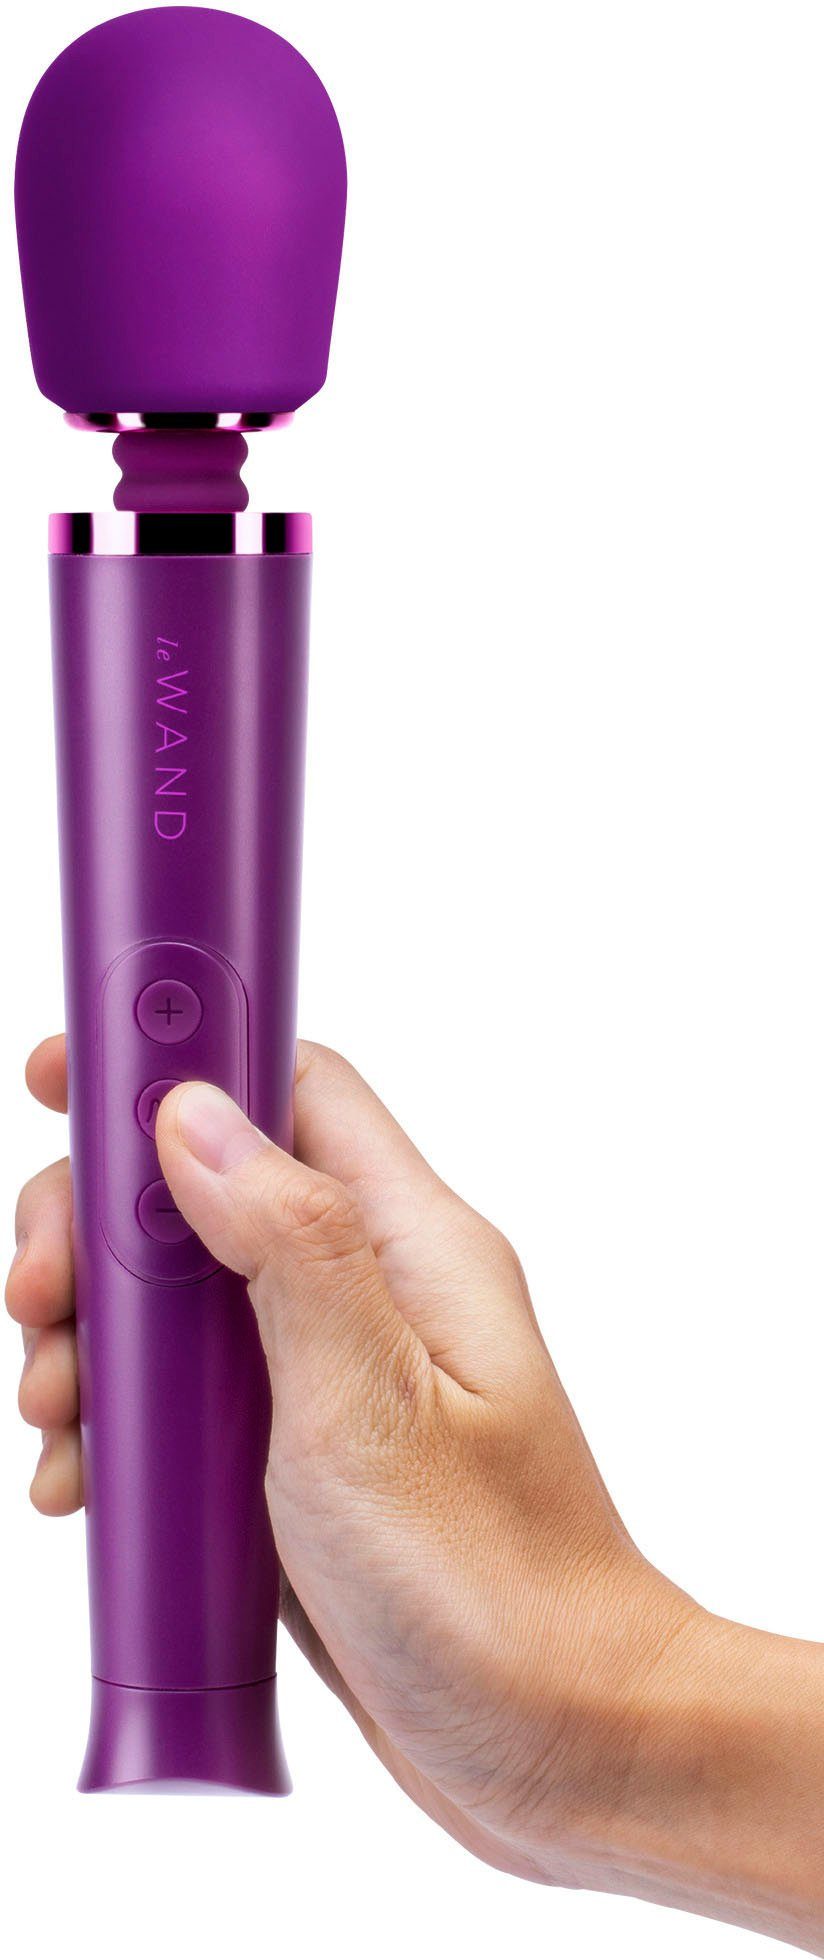 Wand Cherry Massager Recharge Le Wand